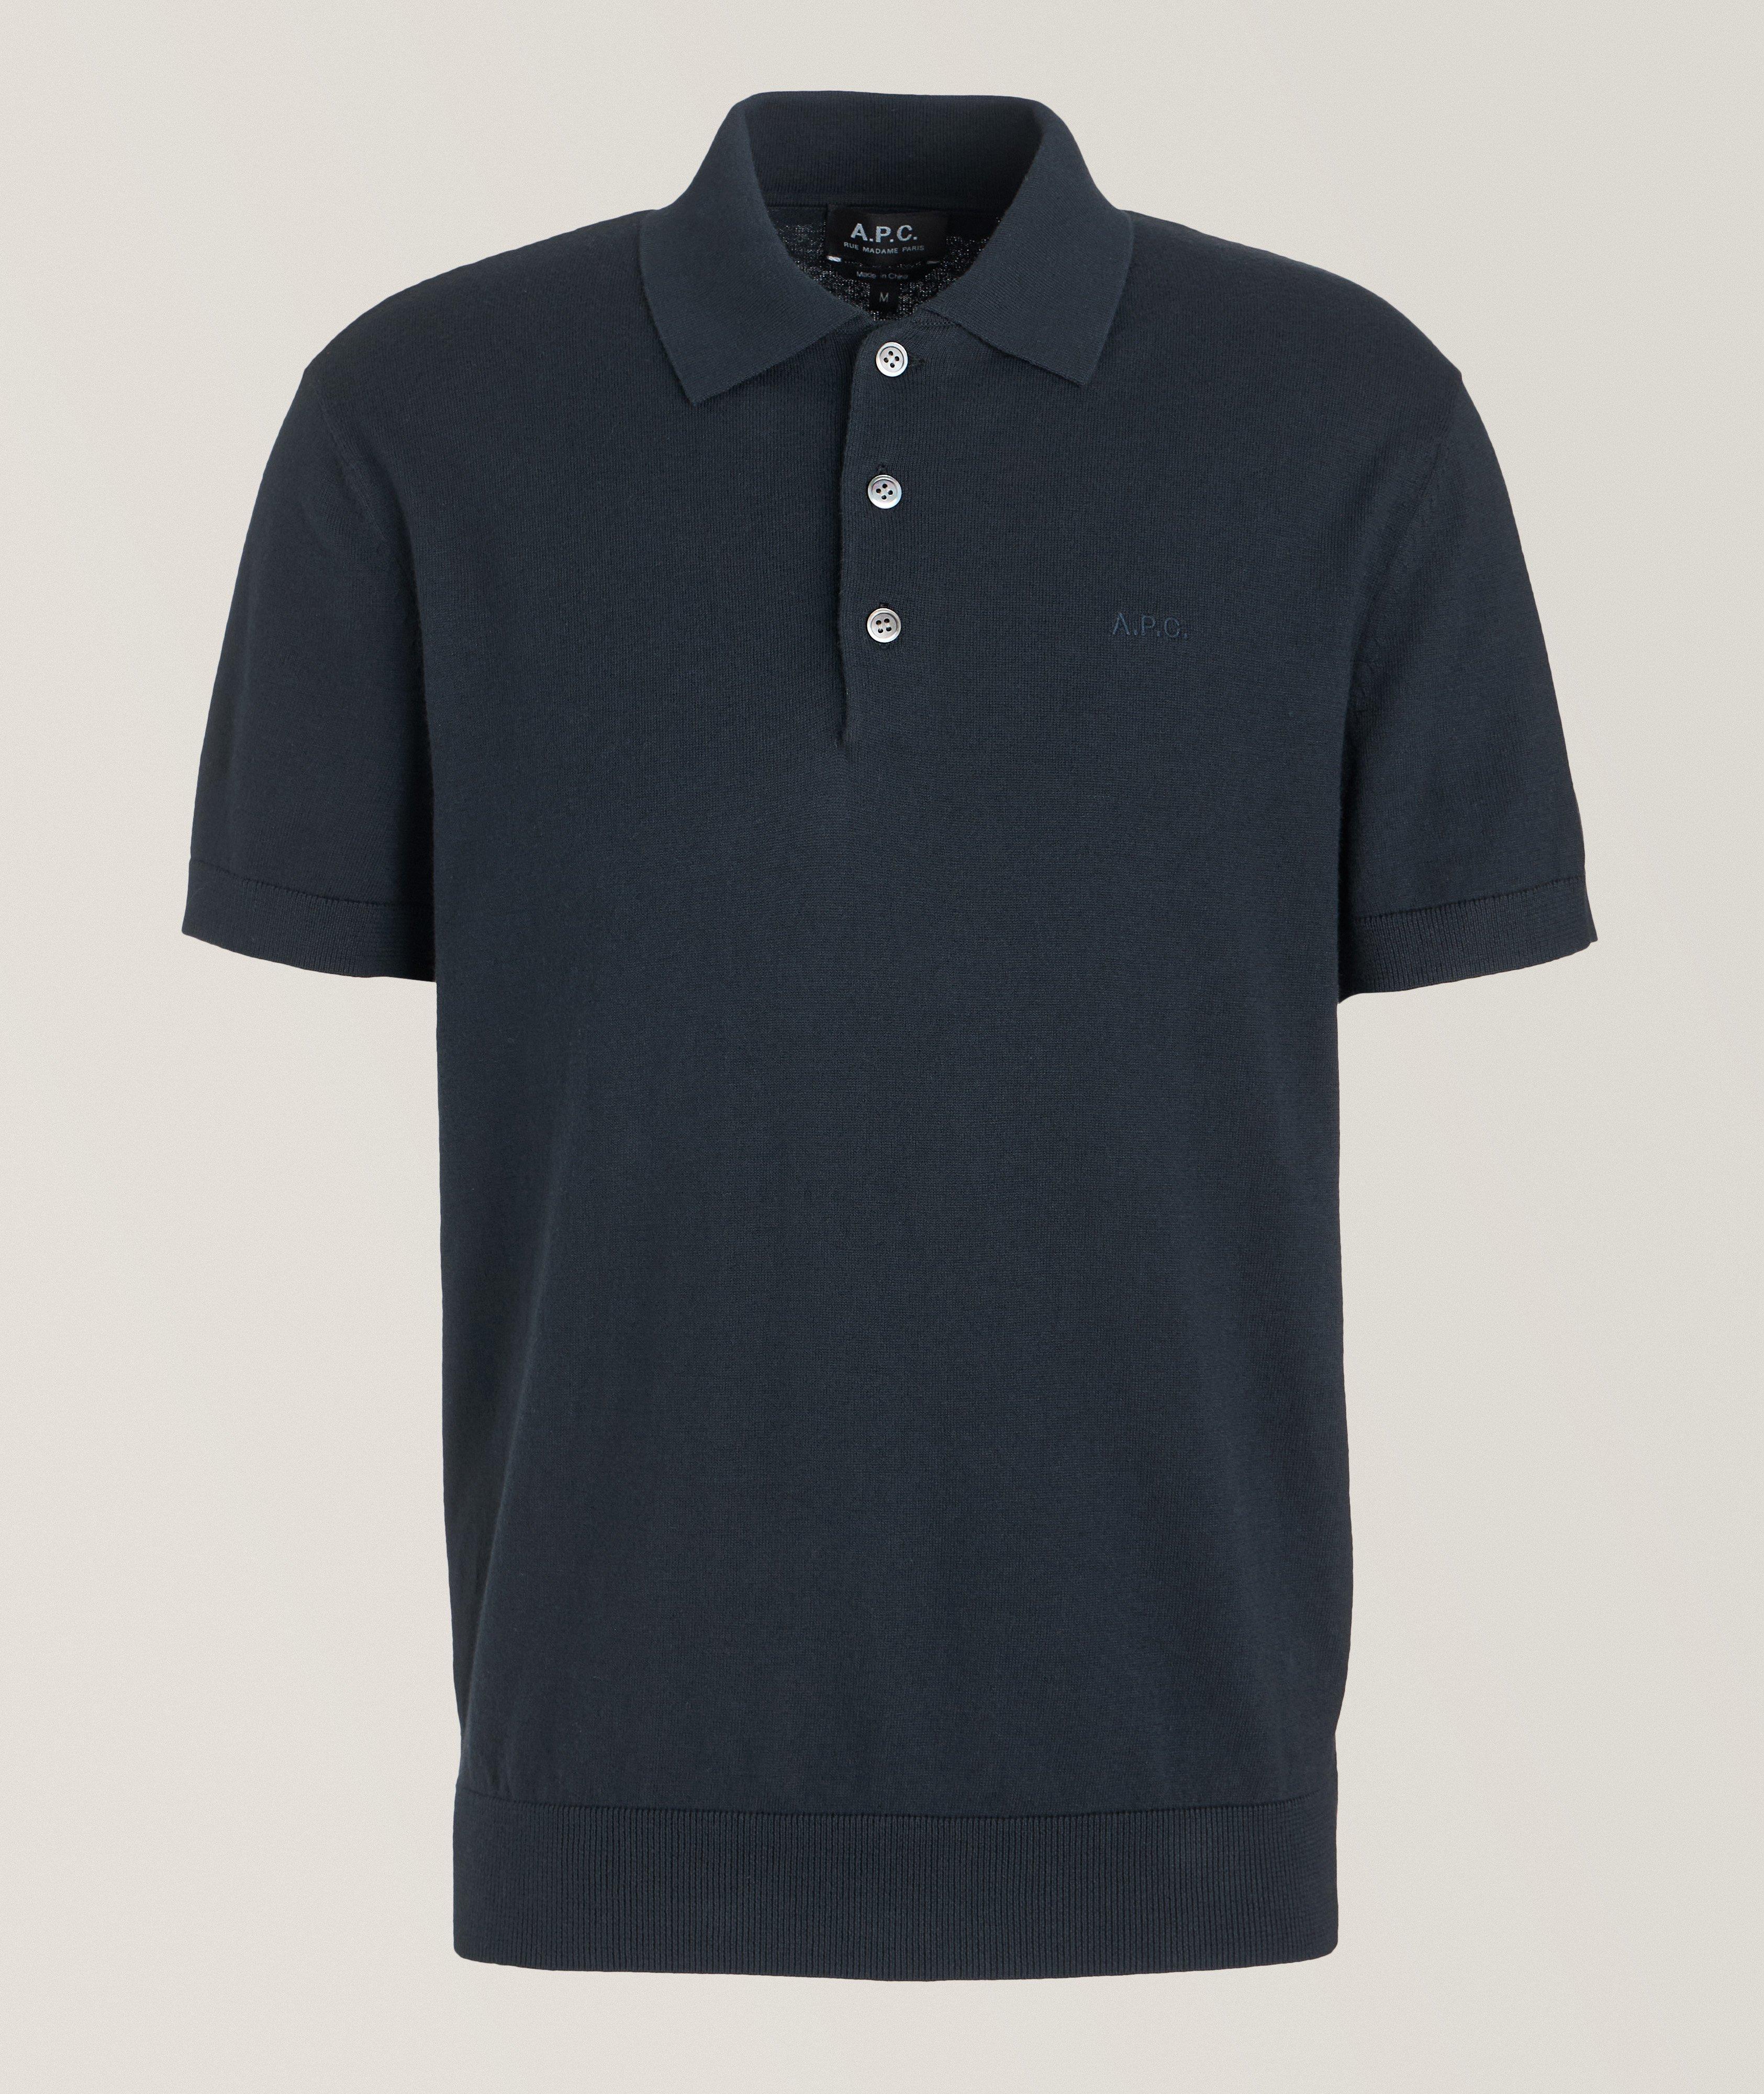 A.P.C. Gregory Organic Cotton-Cashmere Knitted Polo